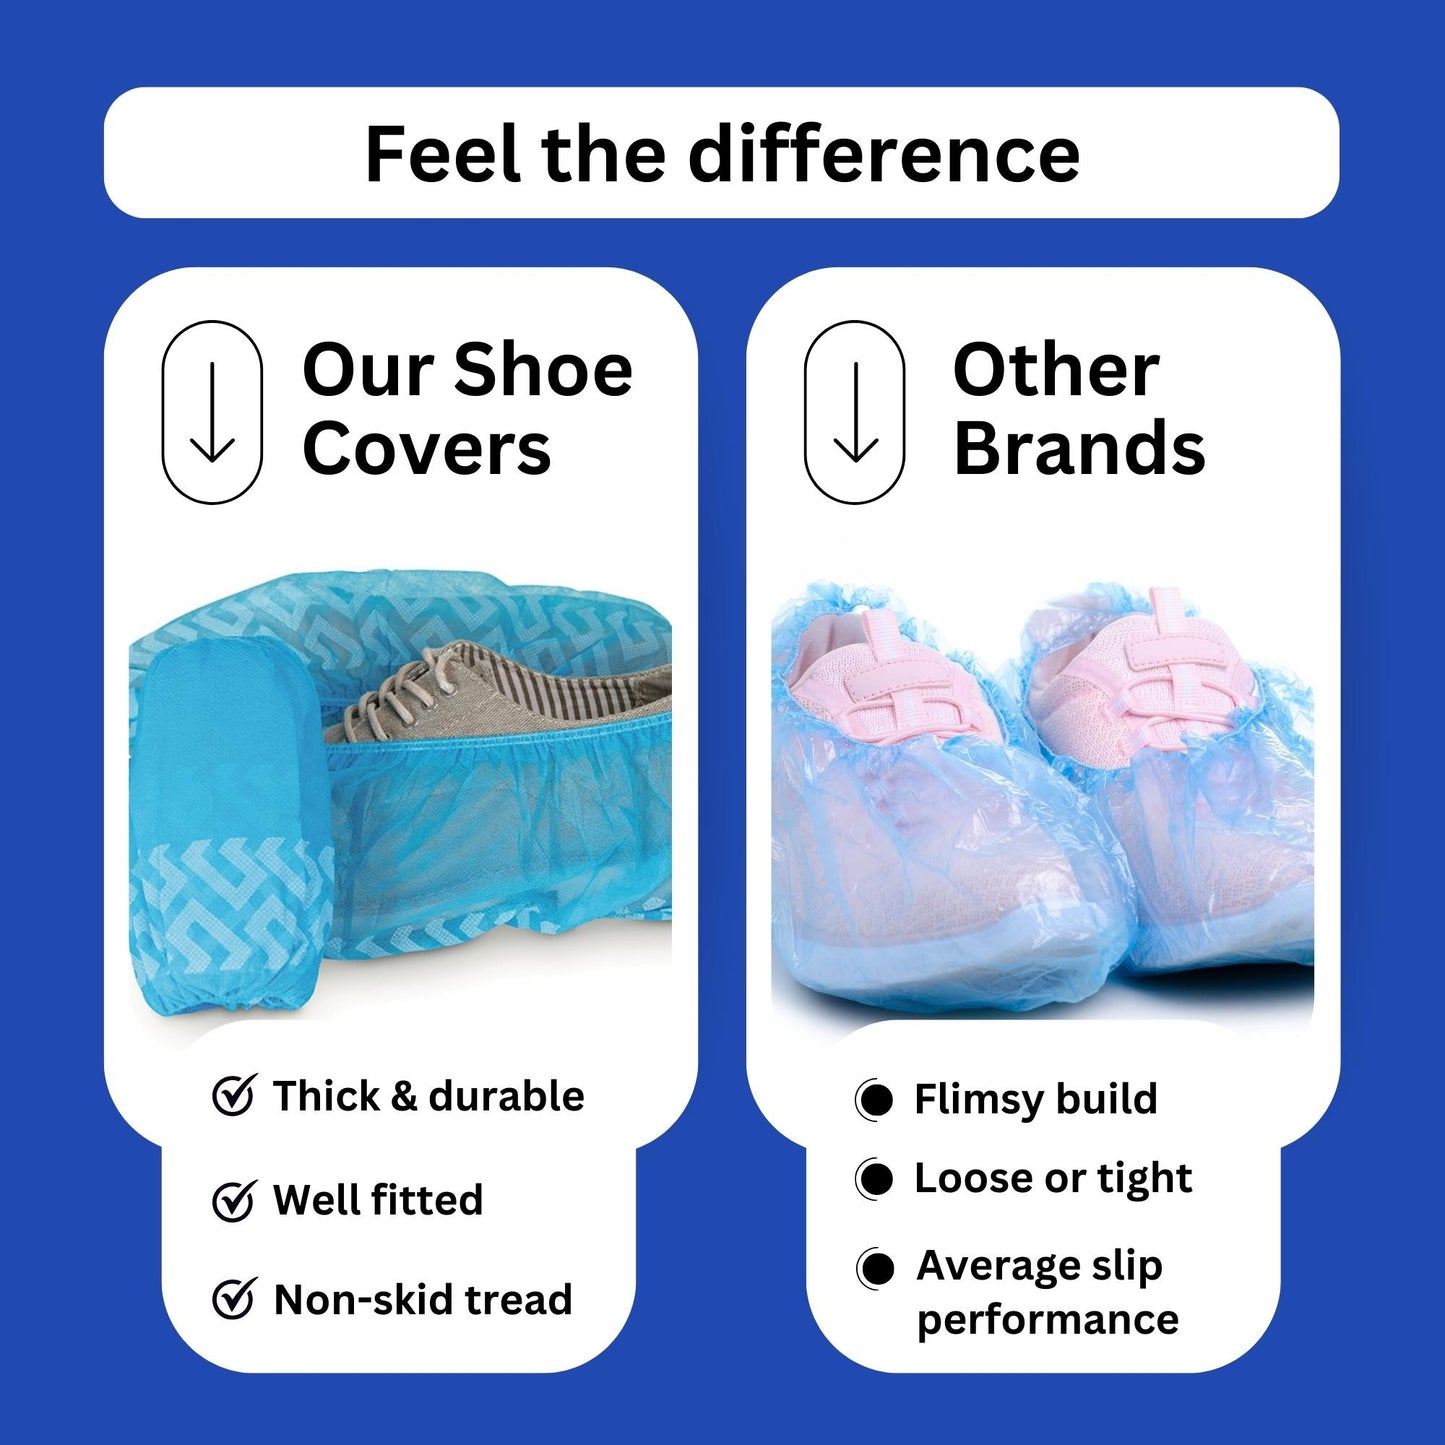 100 pcs - Disposable Anti-Skid Shoe Covers, 40 grams Premium, Tread Protection, Extra Large, Water Resistant, Non-Toxic, 100% Virgin Fabric, Blue